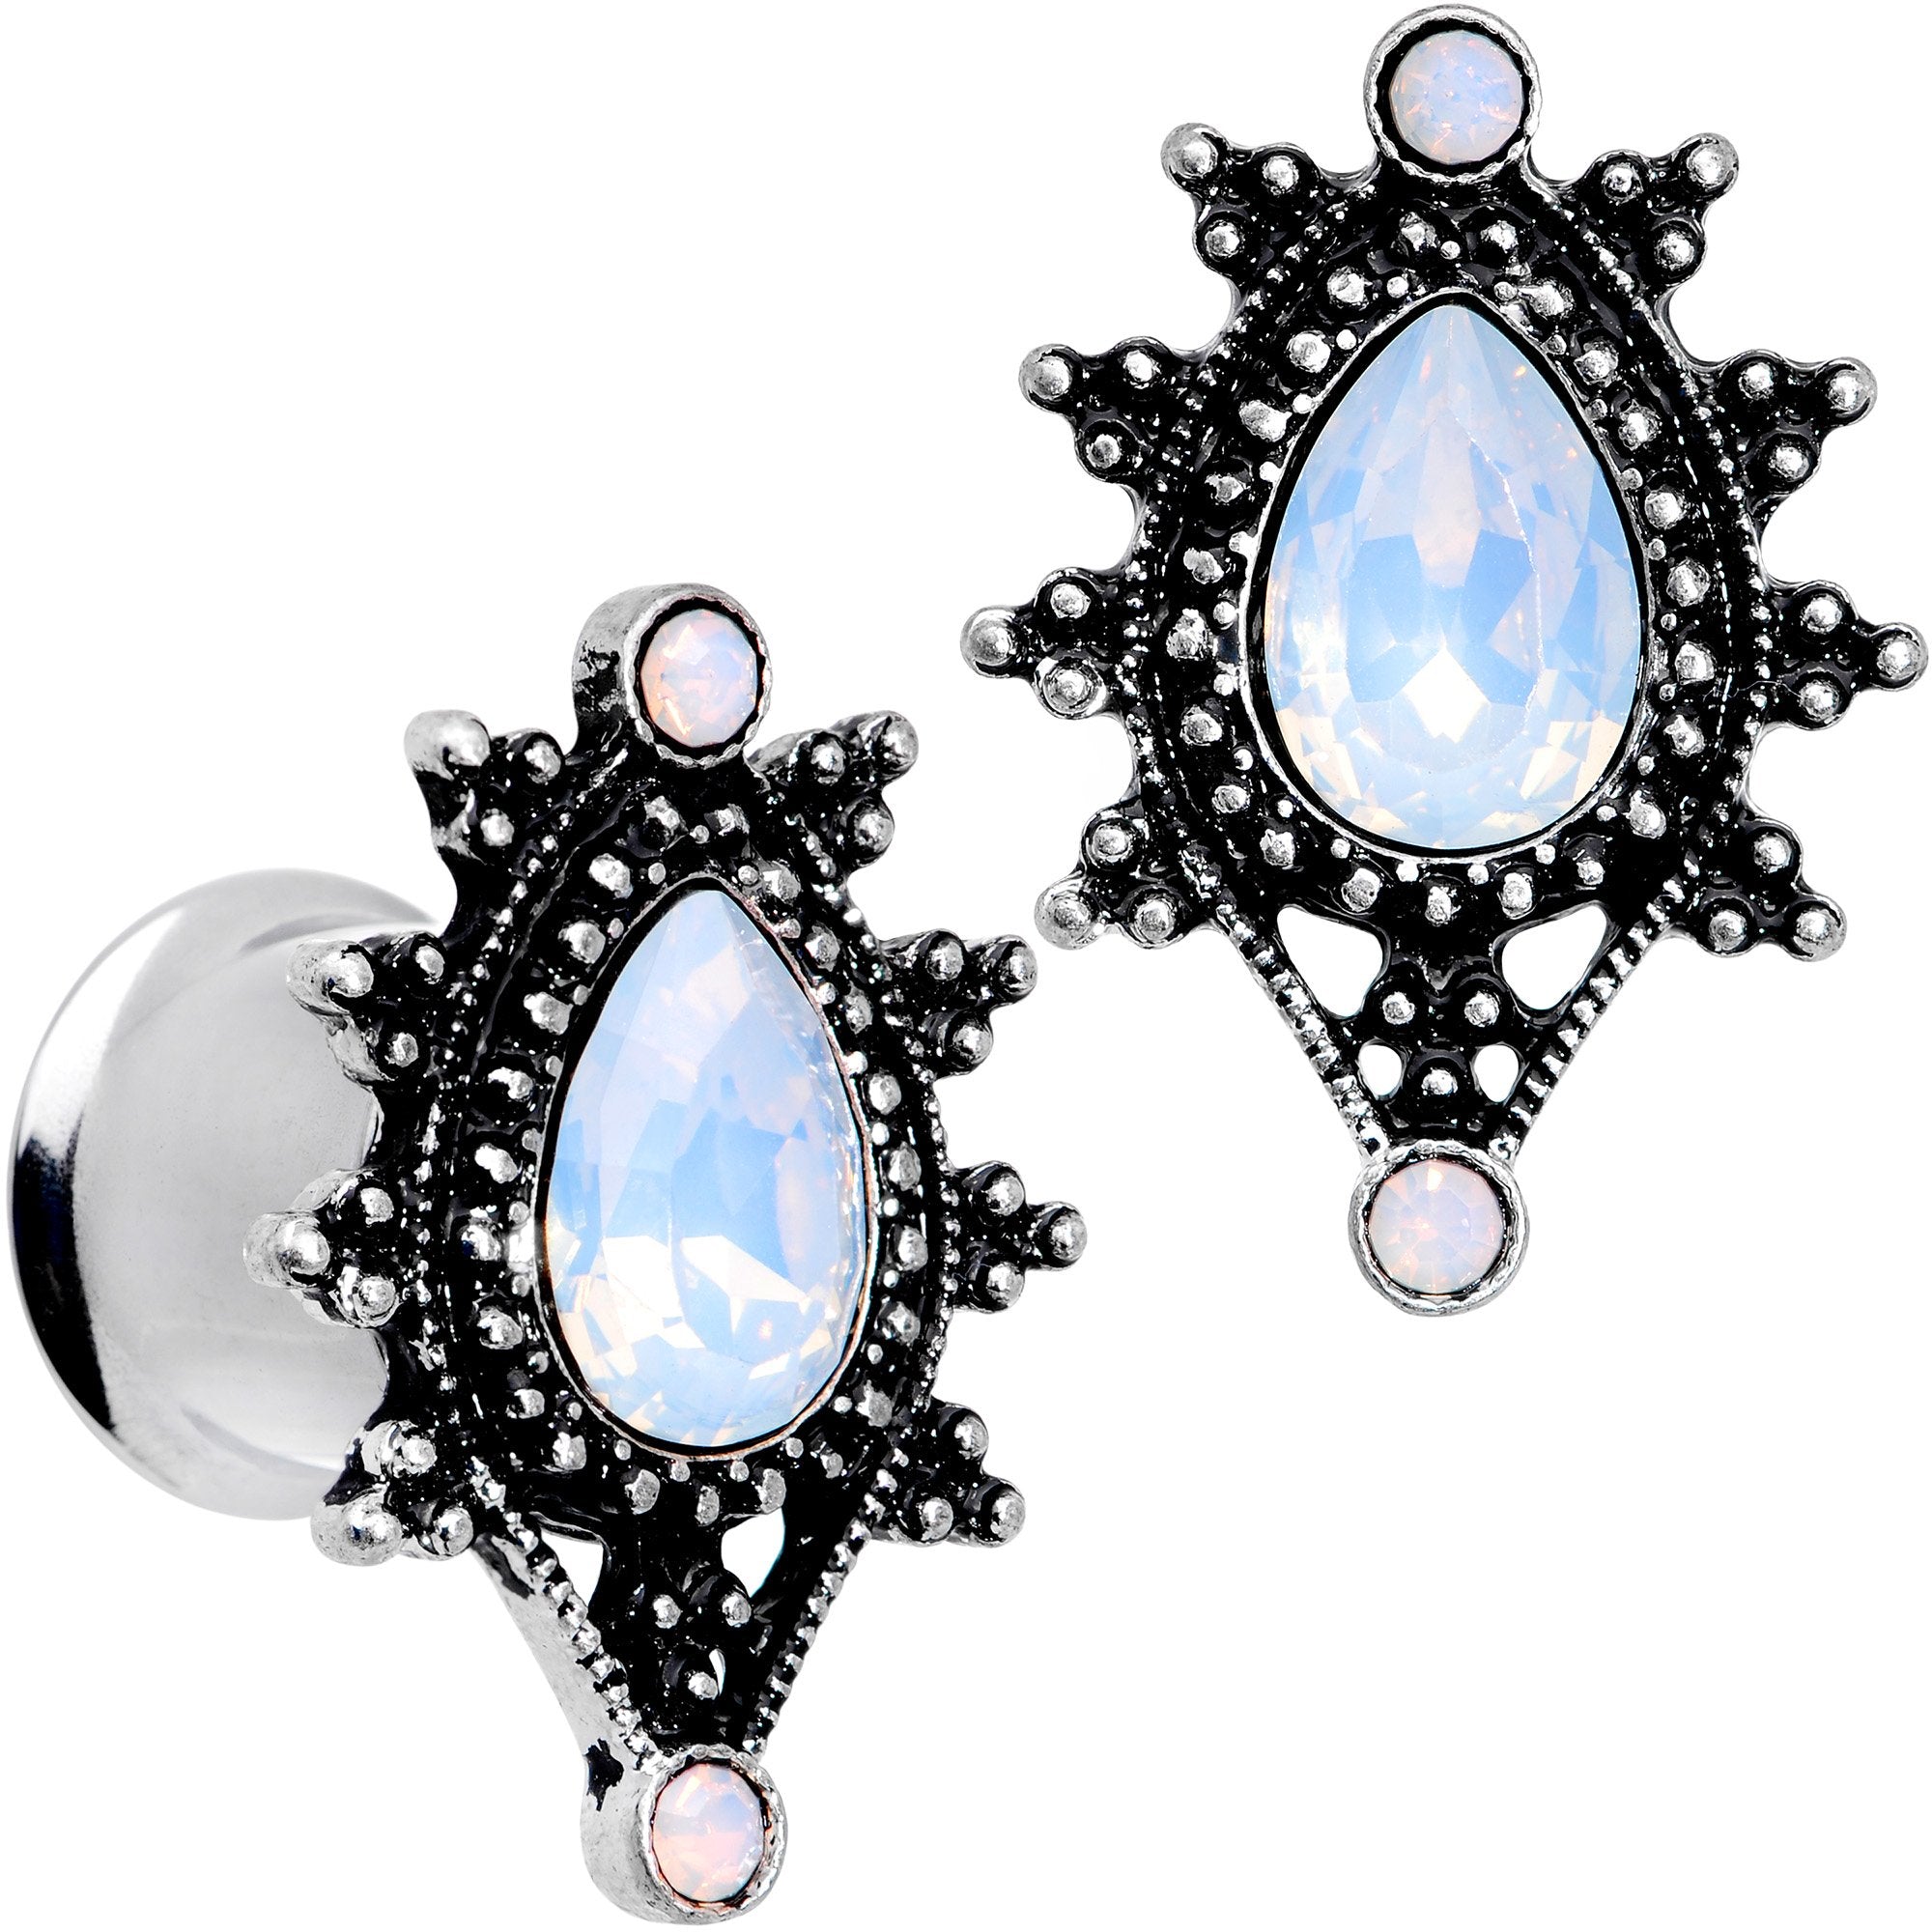 White Faux Opal Filigree Framed Double Flare Plug Set 6mm  to 12mm